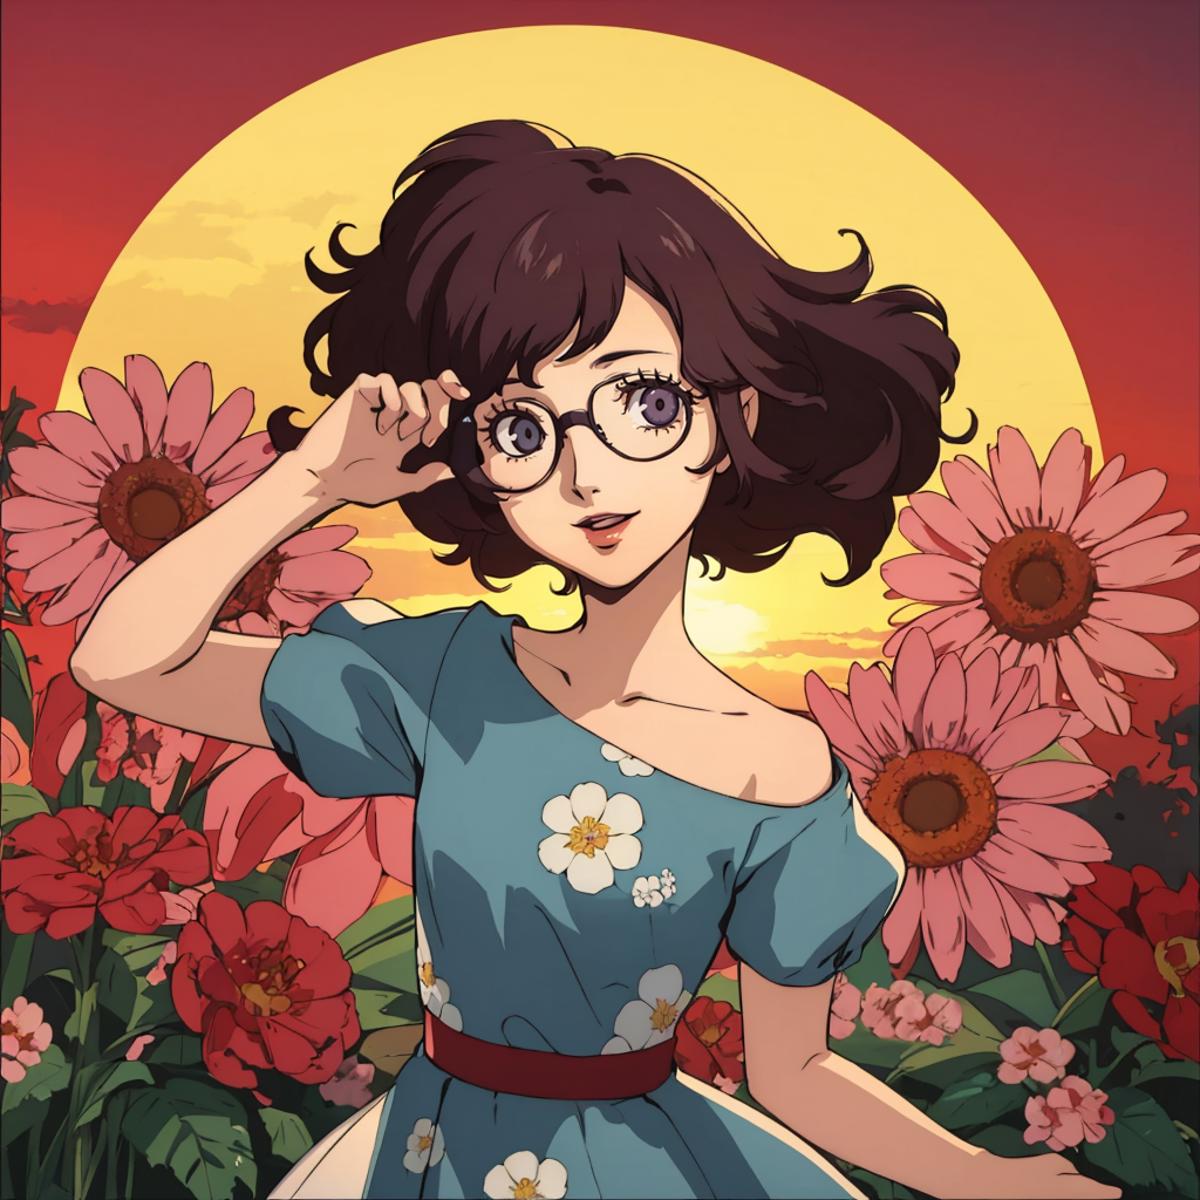 A woman with glasses and a flower dress posing in front of a sunflower field.